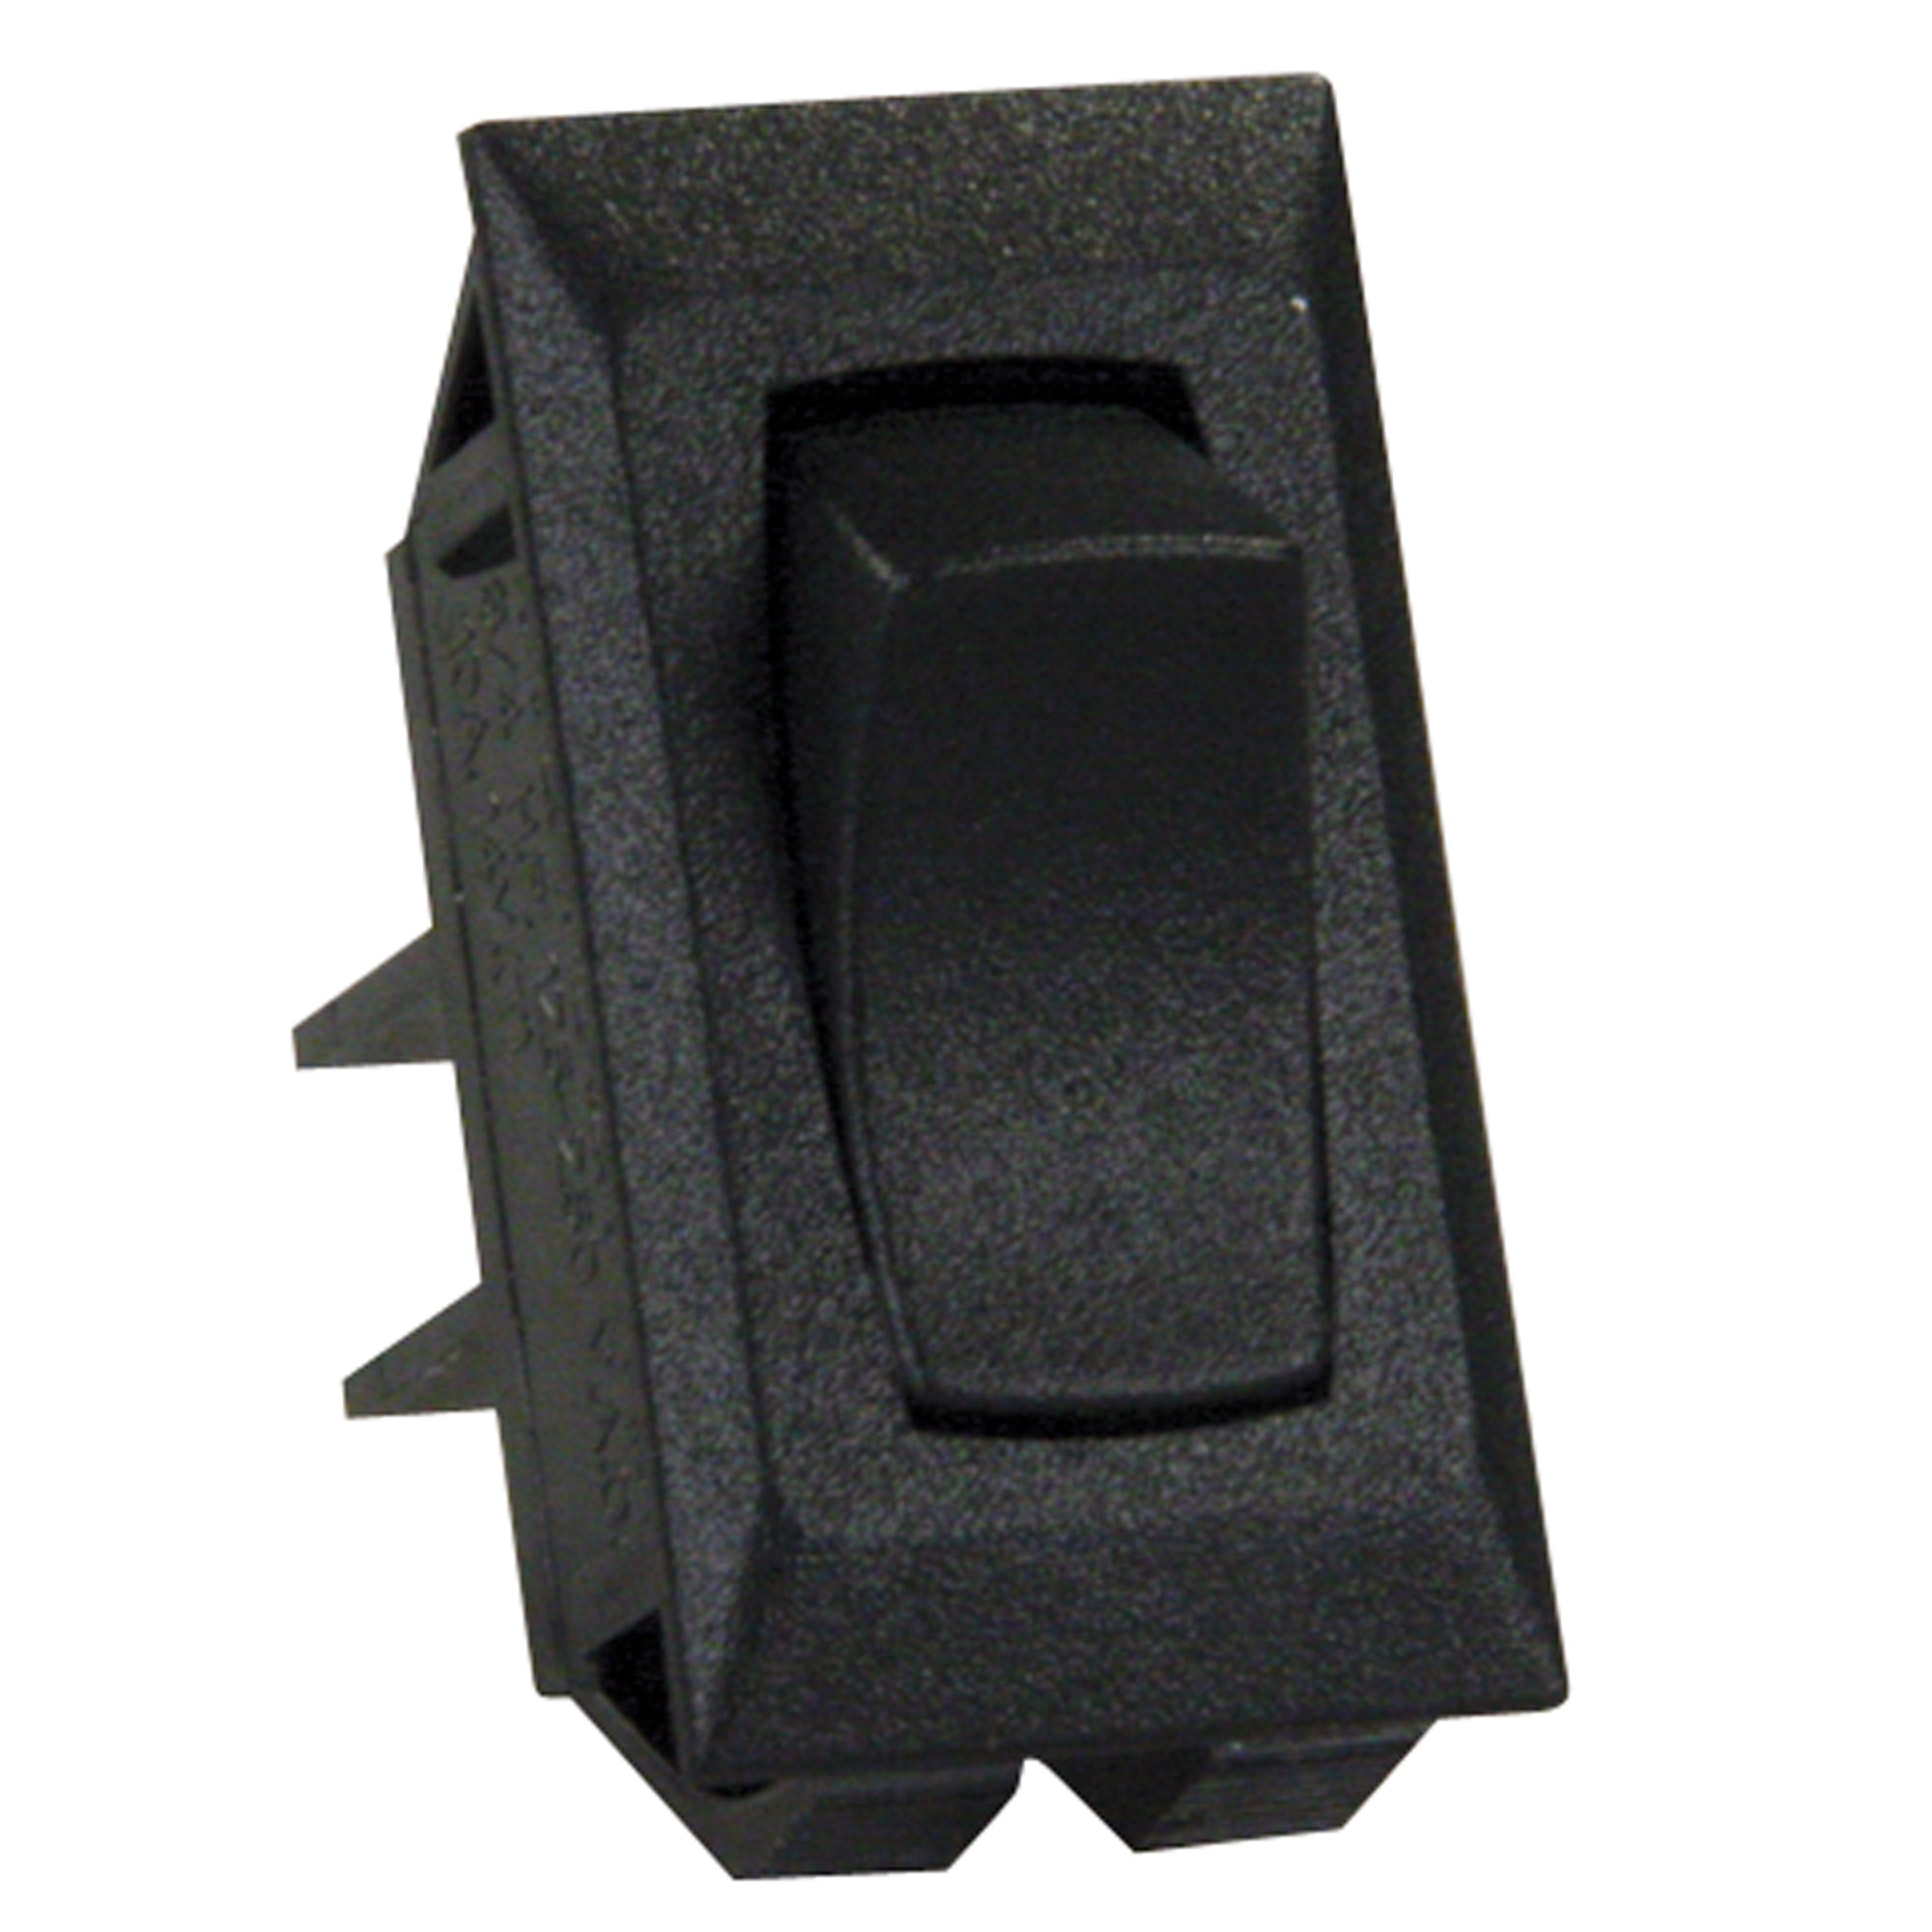 JR Products 13401-5 On/Off Switch, Pack of 5 - Black